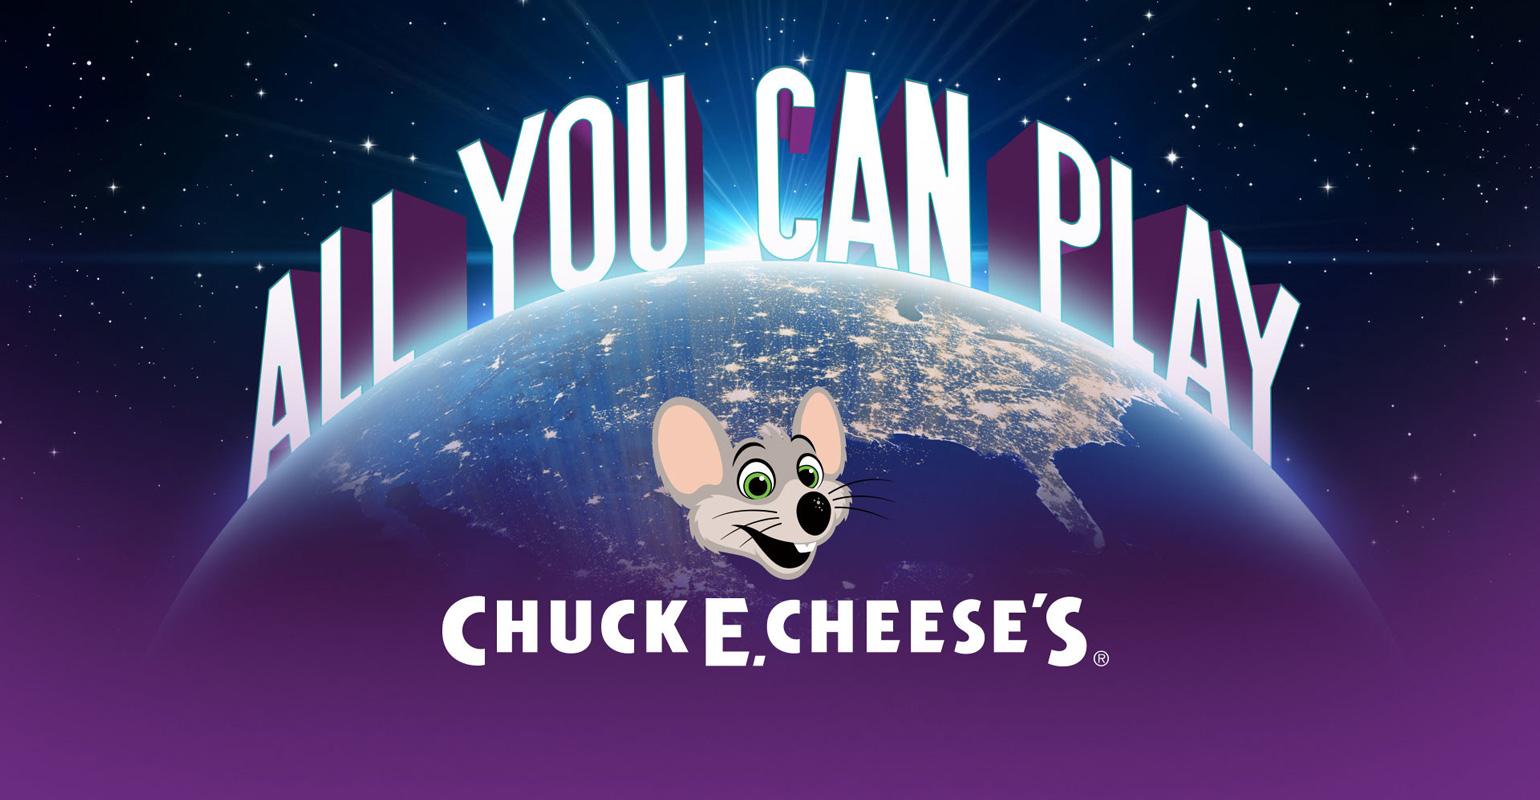 Chuck E. Cheese’s launches “All You Can Play” gaming model Nation's